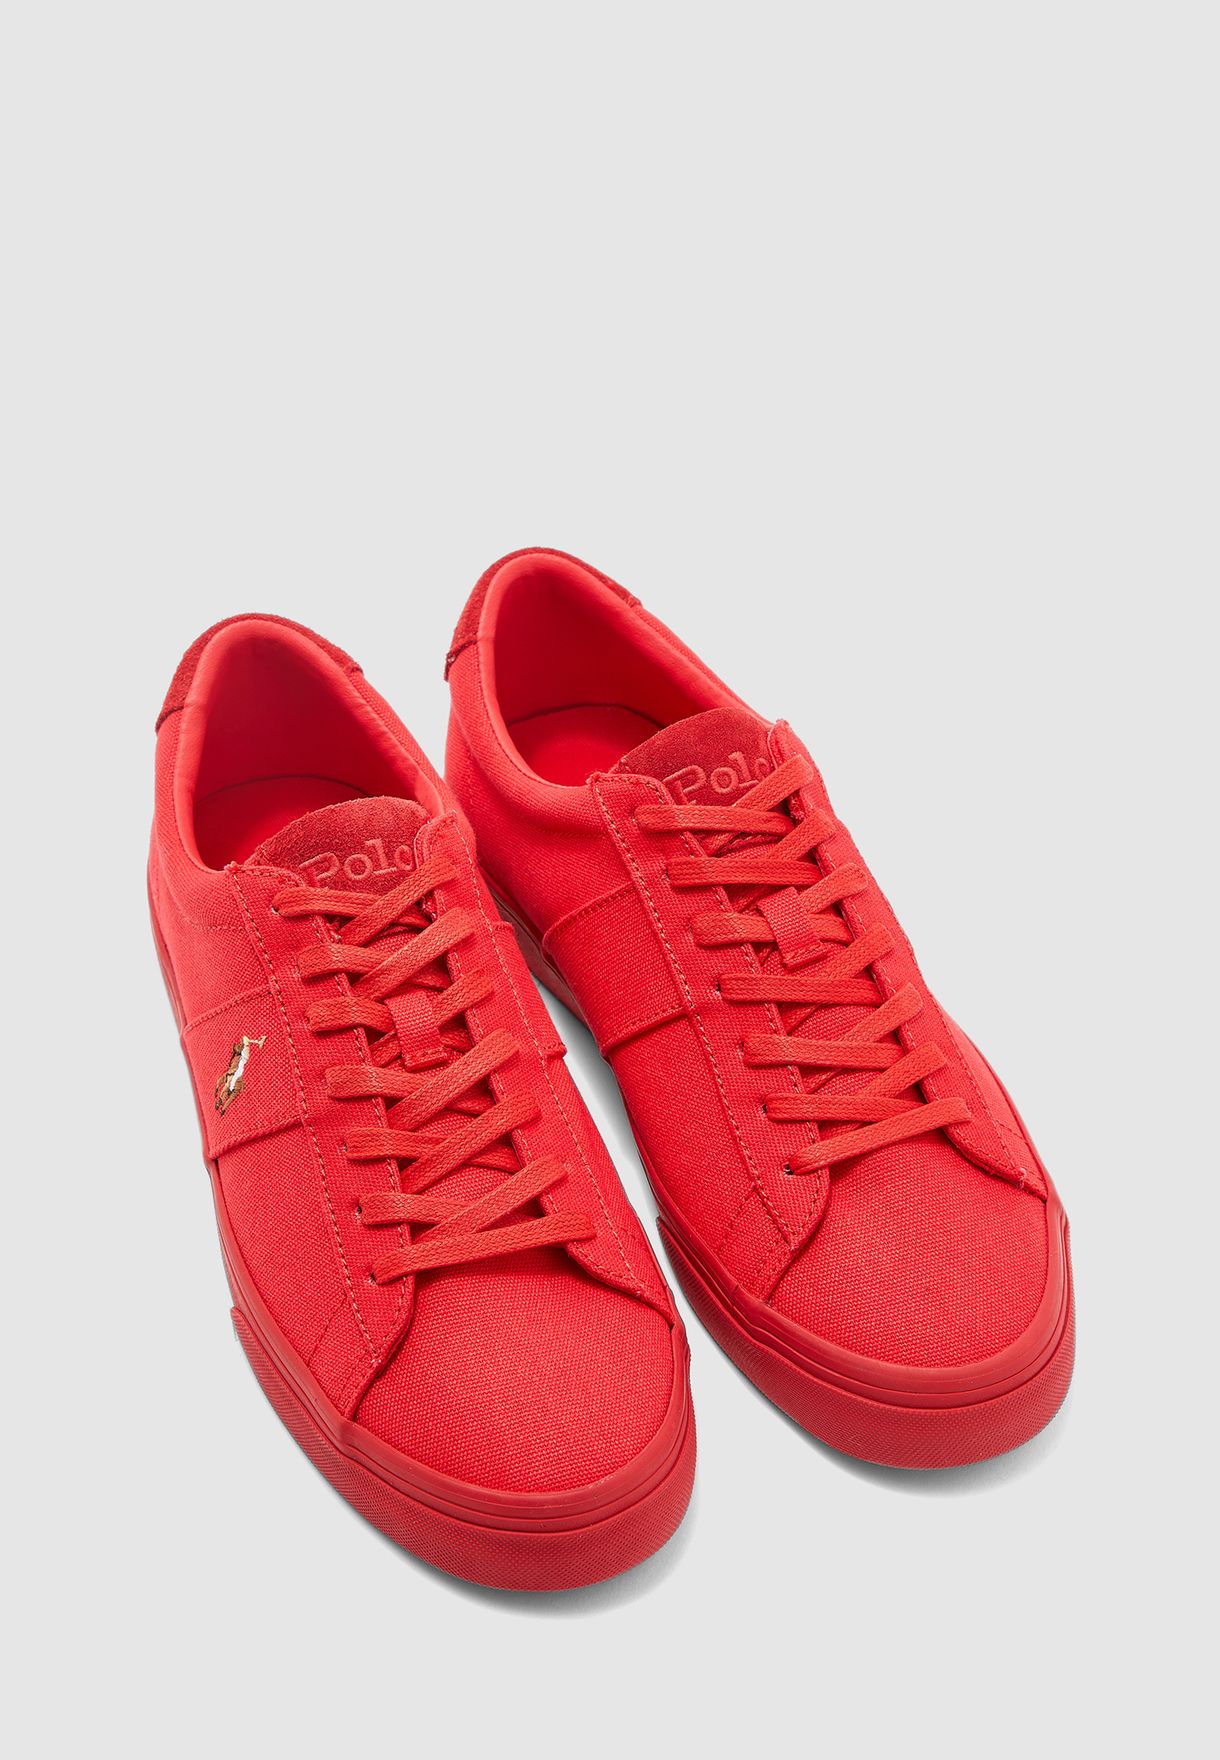 Polo Ralph Lauren red Sayer Sneakers 